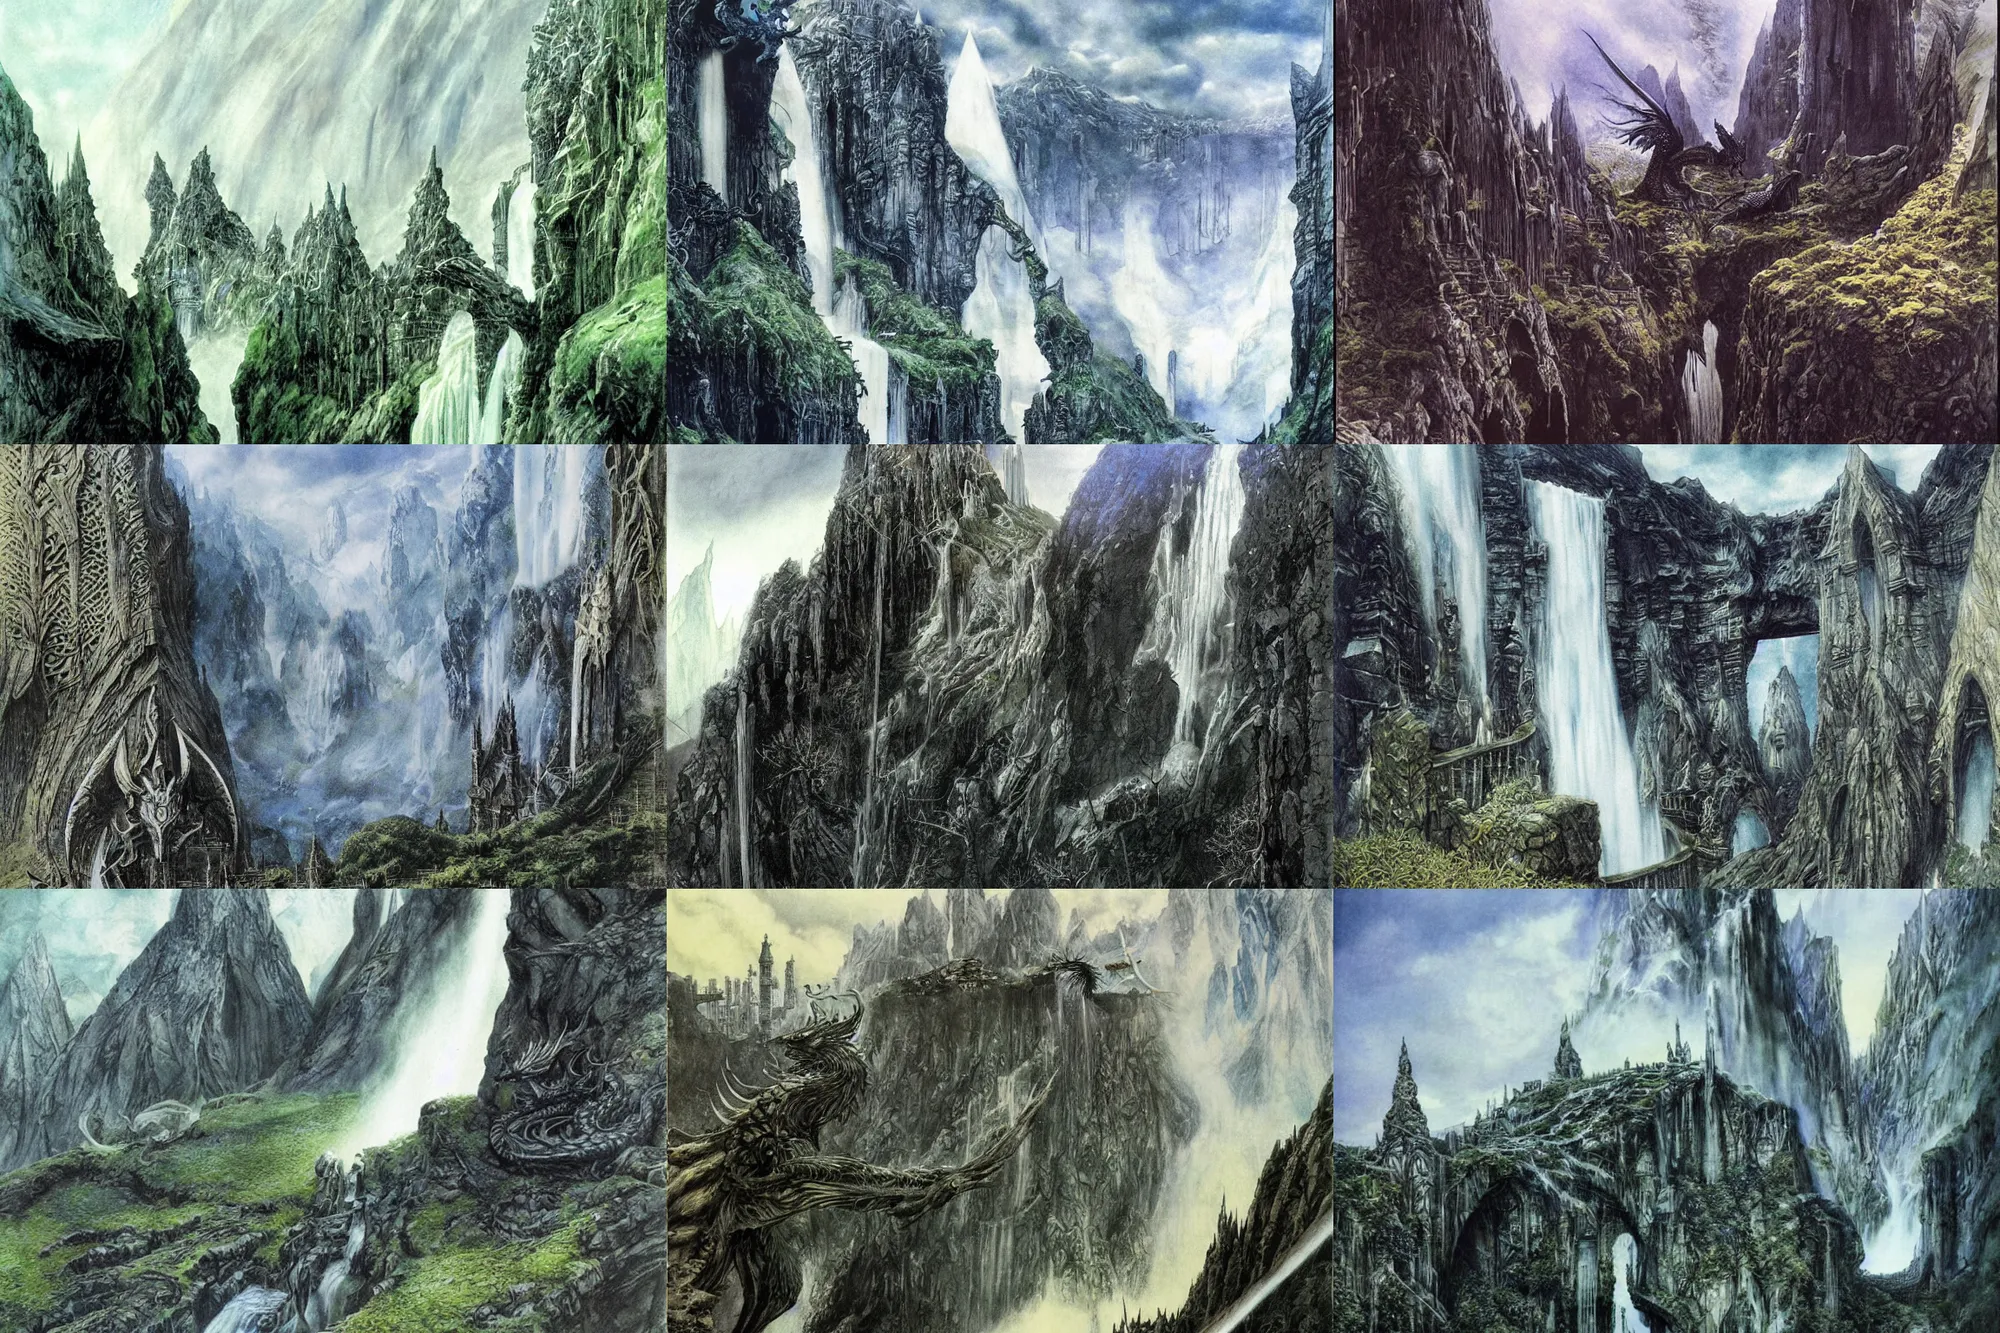 Prompt: An elven city of white sitting in a mountain valley, waterfalls cascade down nearby cliffs, A black dragon casts a shadow from a above onto the elven architecture. Fantasy art by Alan Lee.